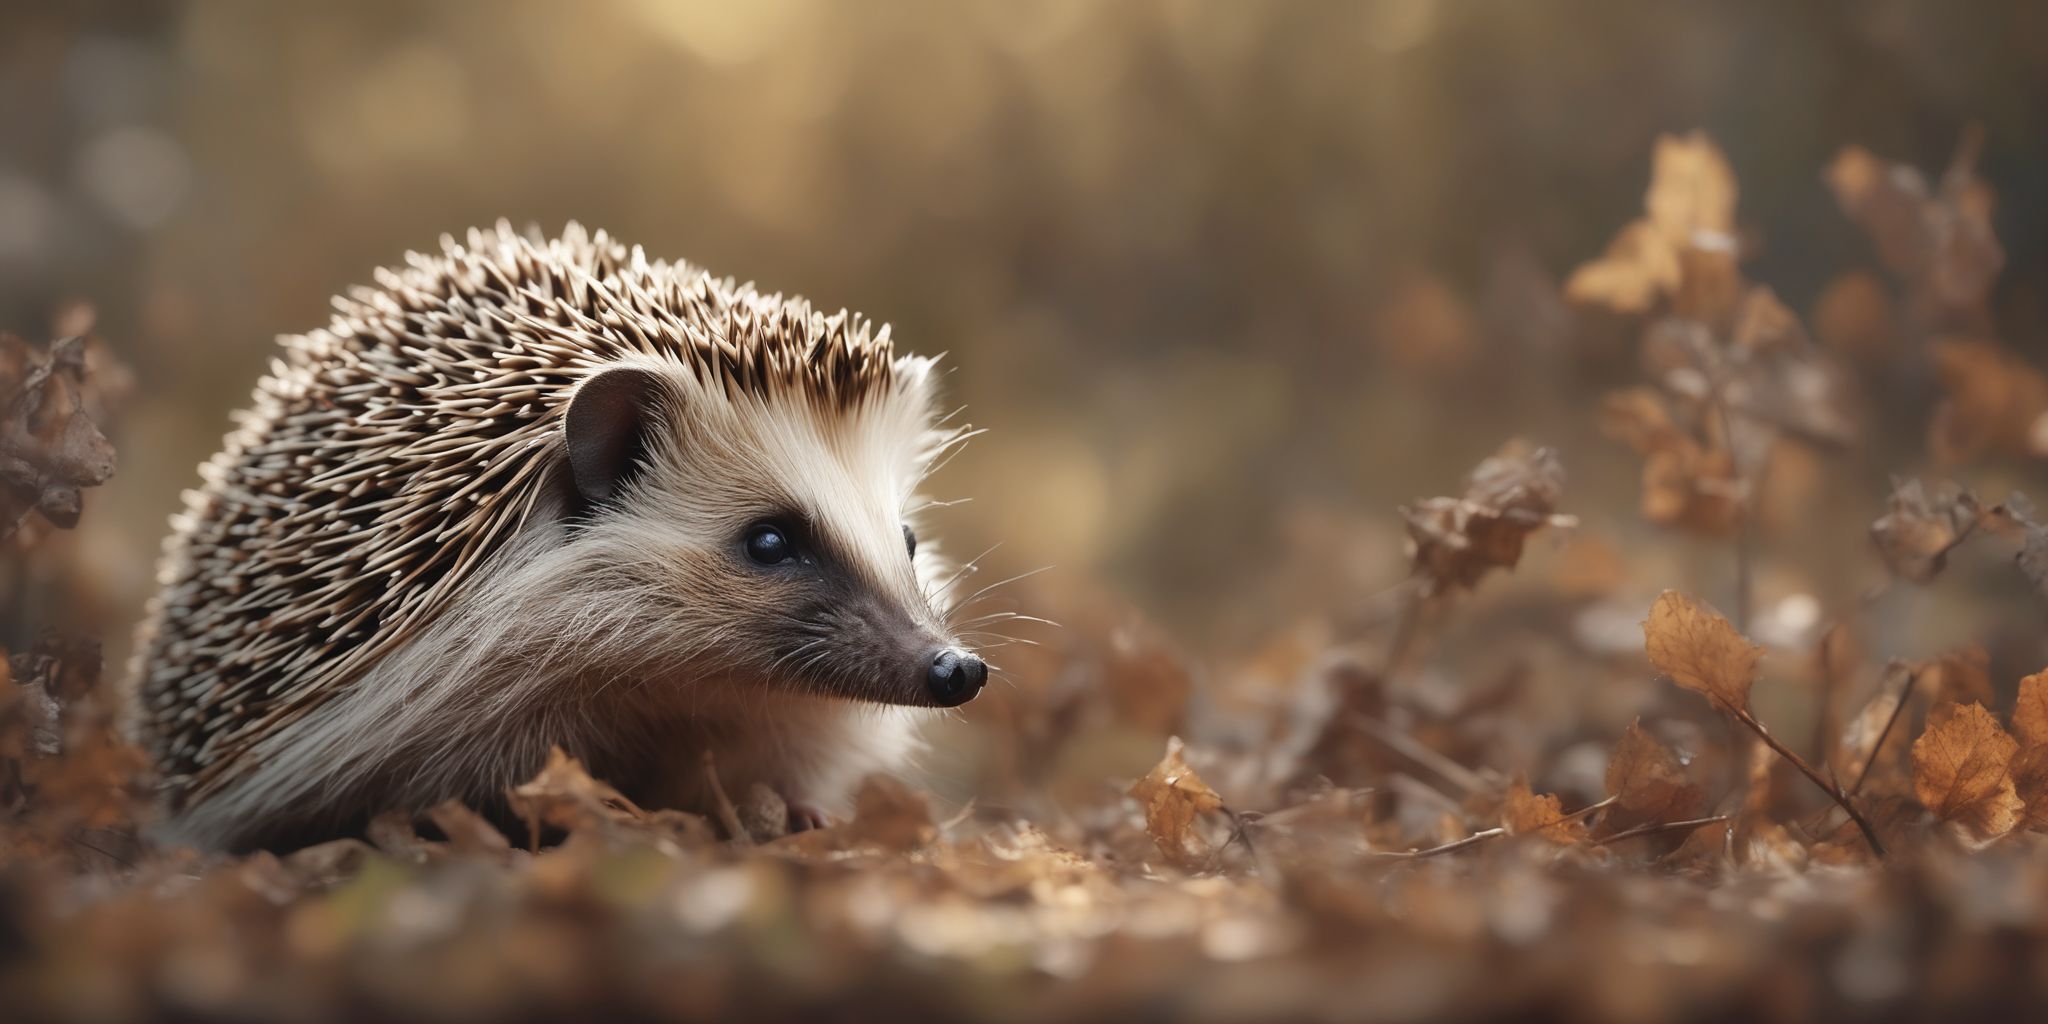 Hedgehog  in realistic, photographic style